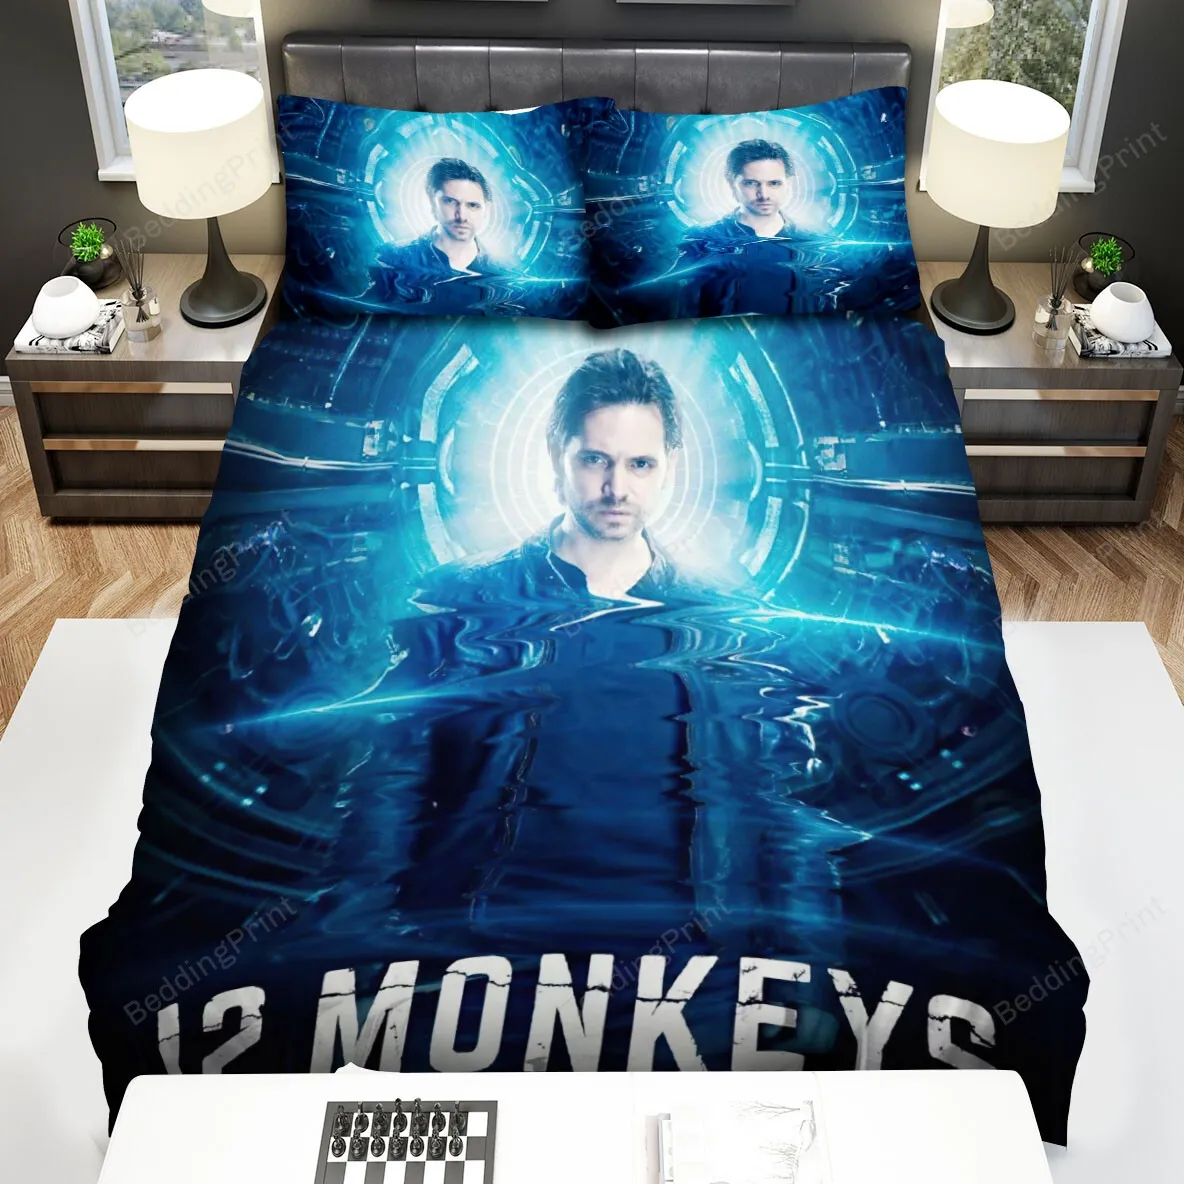 12 Monkeys (20152018) Sacrifice The Past Movie Poster Bed Sheets Spread Comforter Duvet Cover Bedding Sets